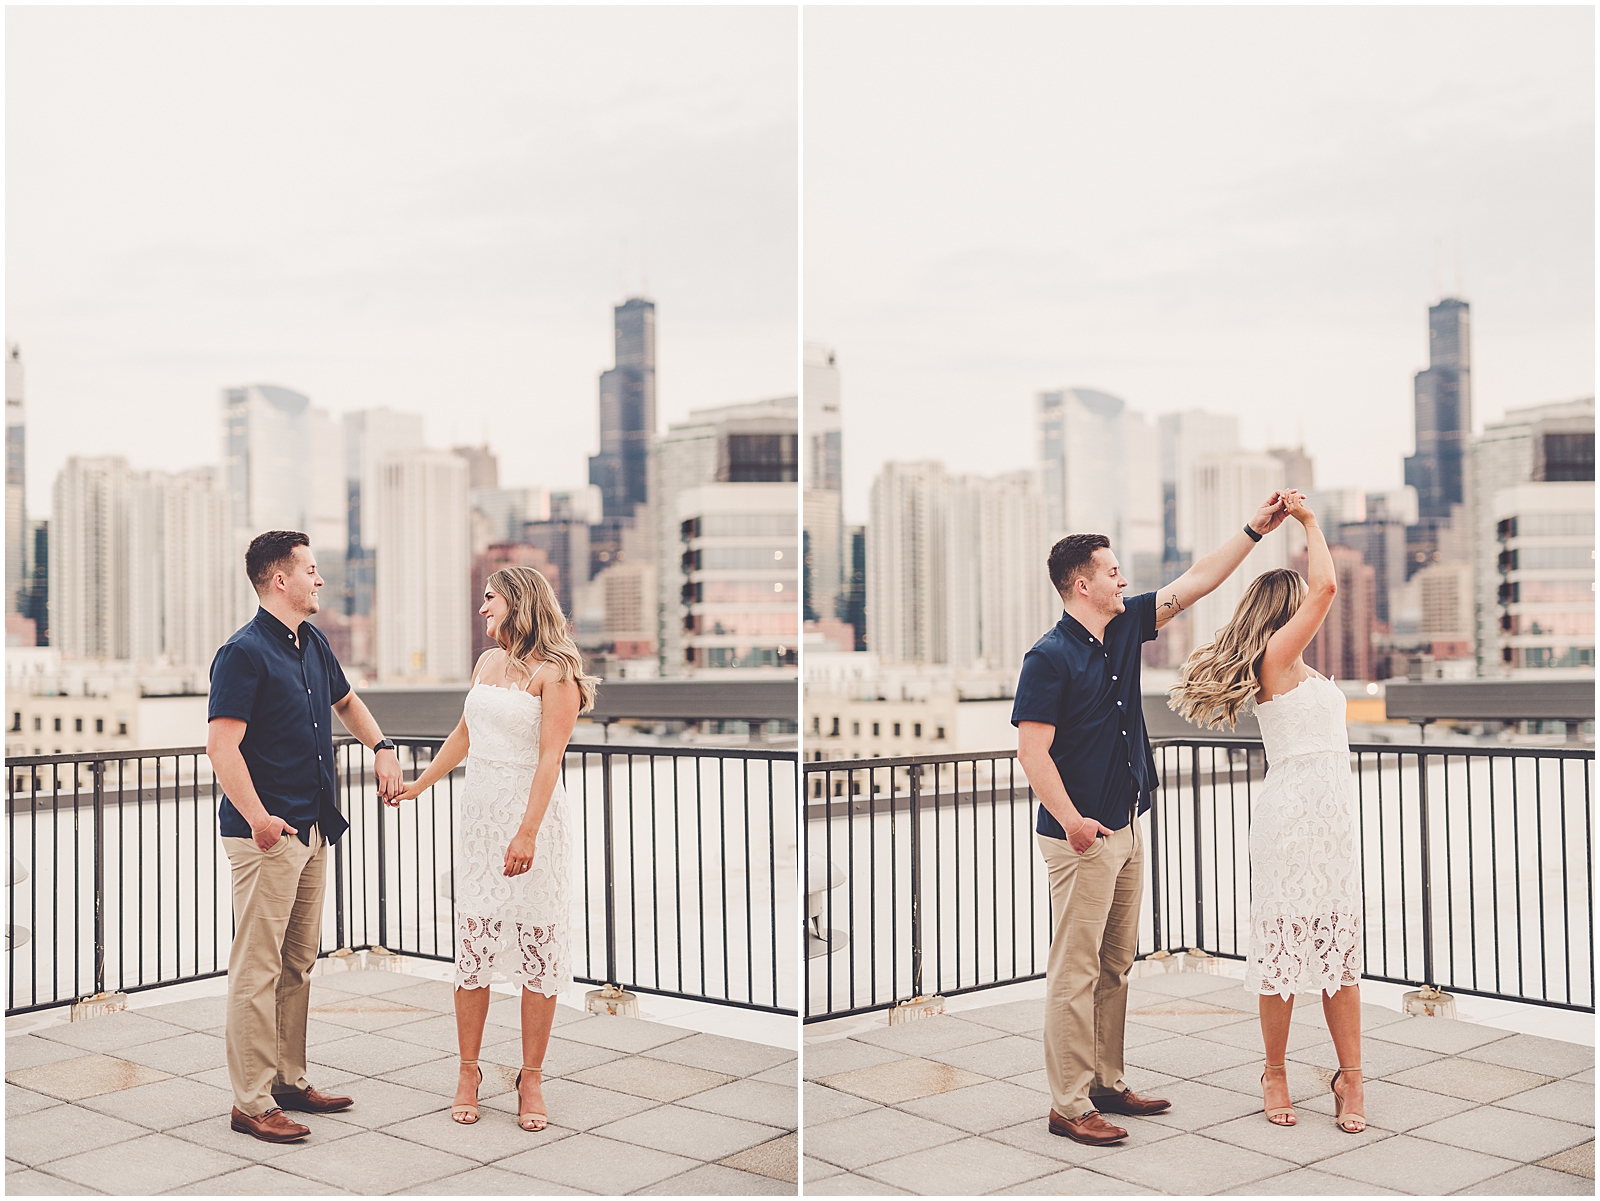 Michele and Timmy's summer River West engagement photos with Chicagoland wedding photographer Kara Evans Photographer.